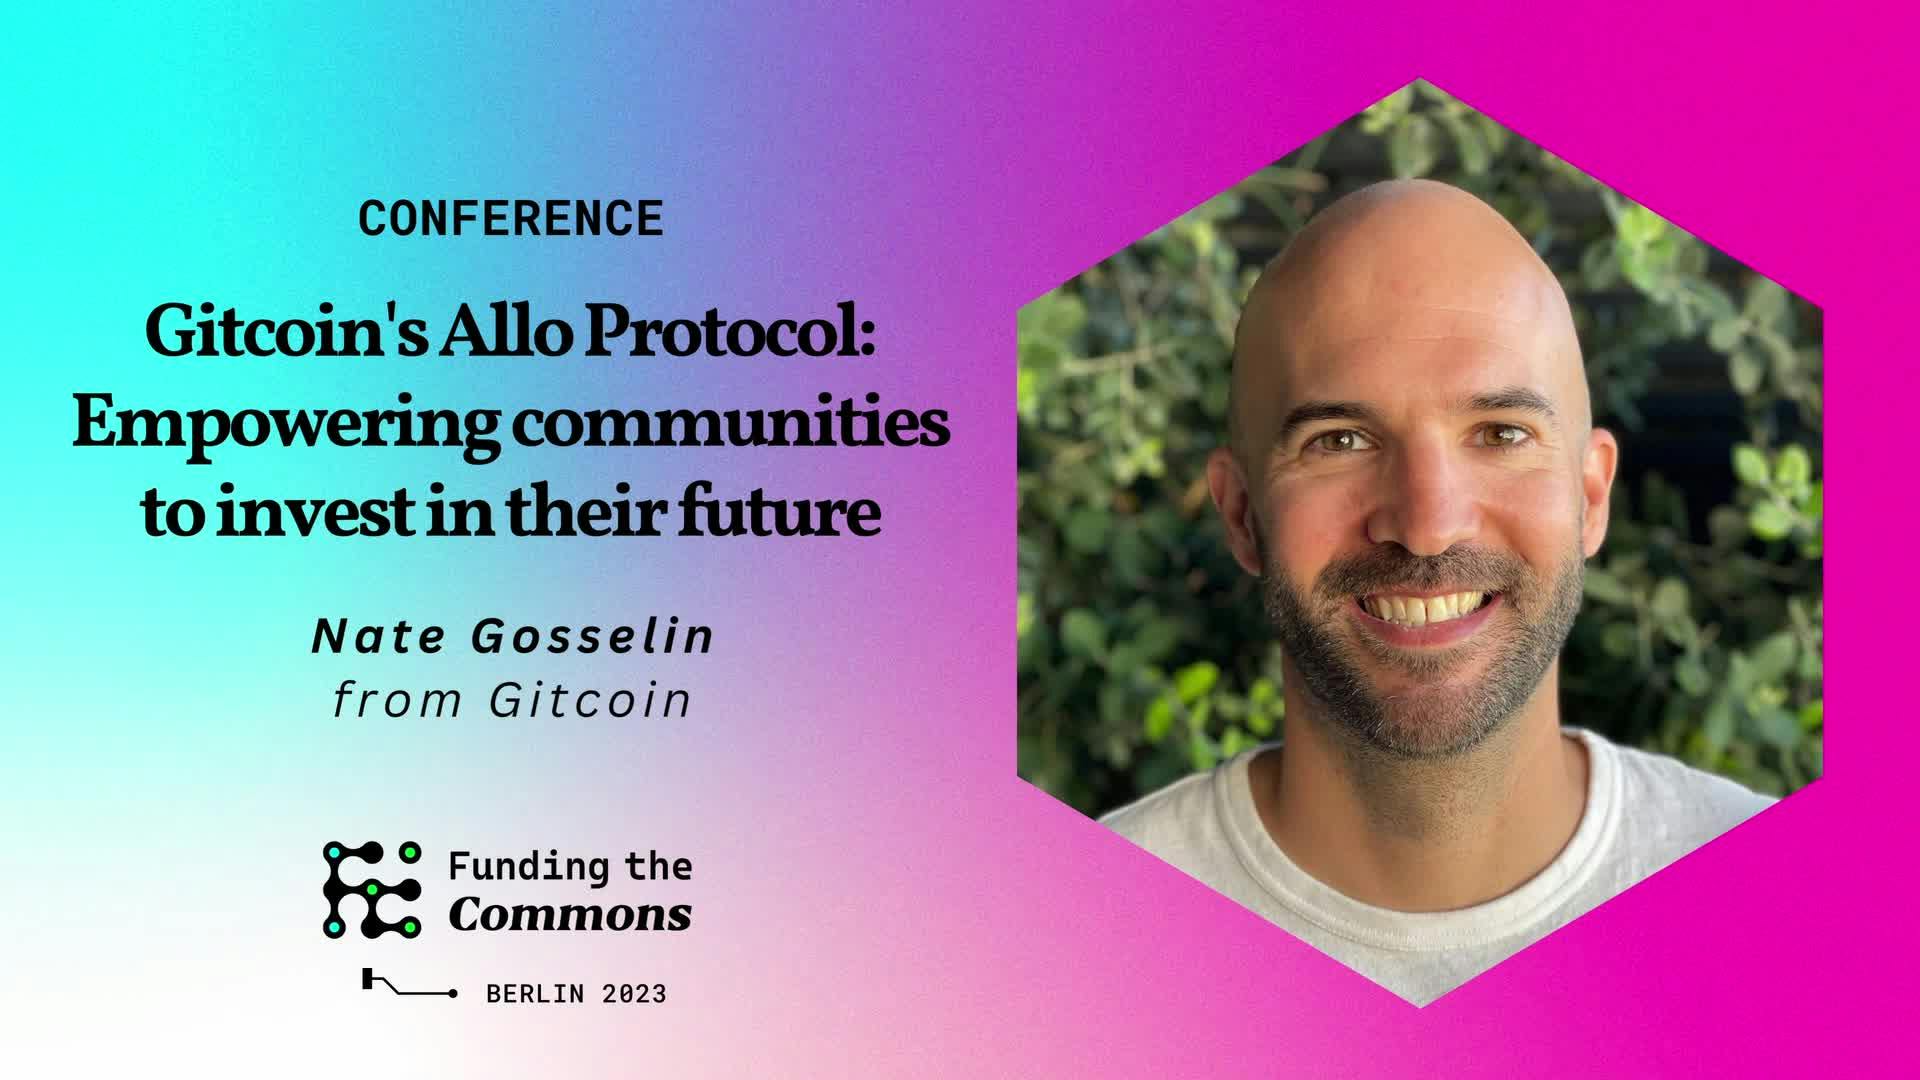 Gitcoin's Allo Protocol: Empowering communities to invest in their future